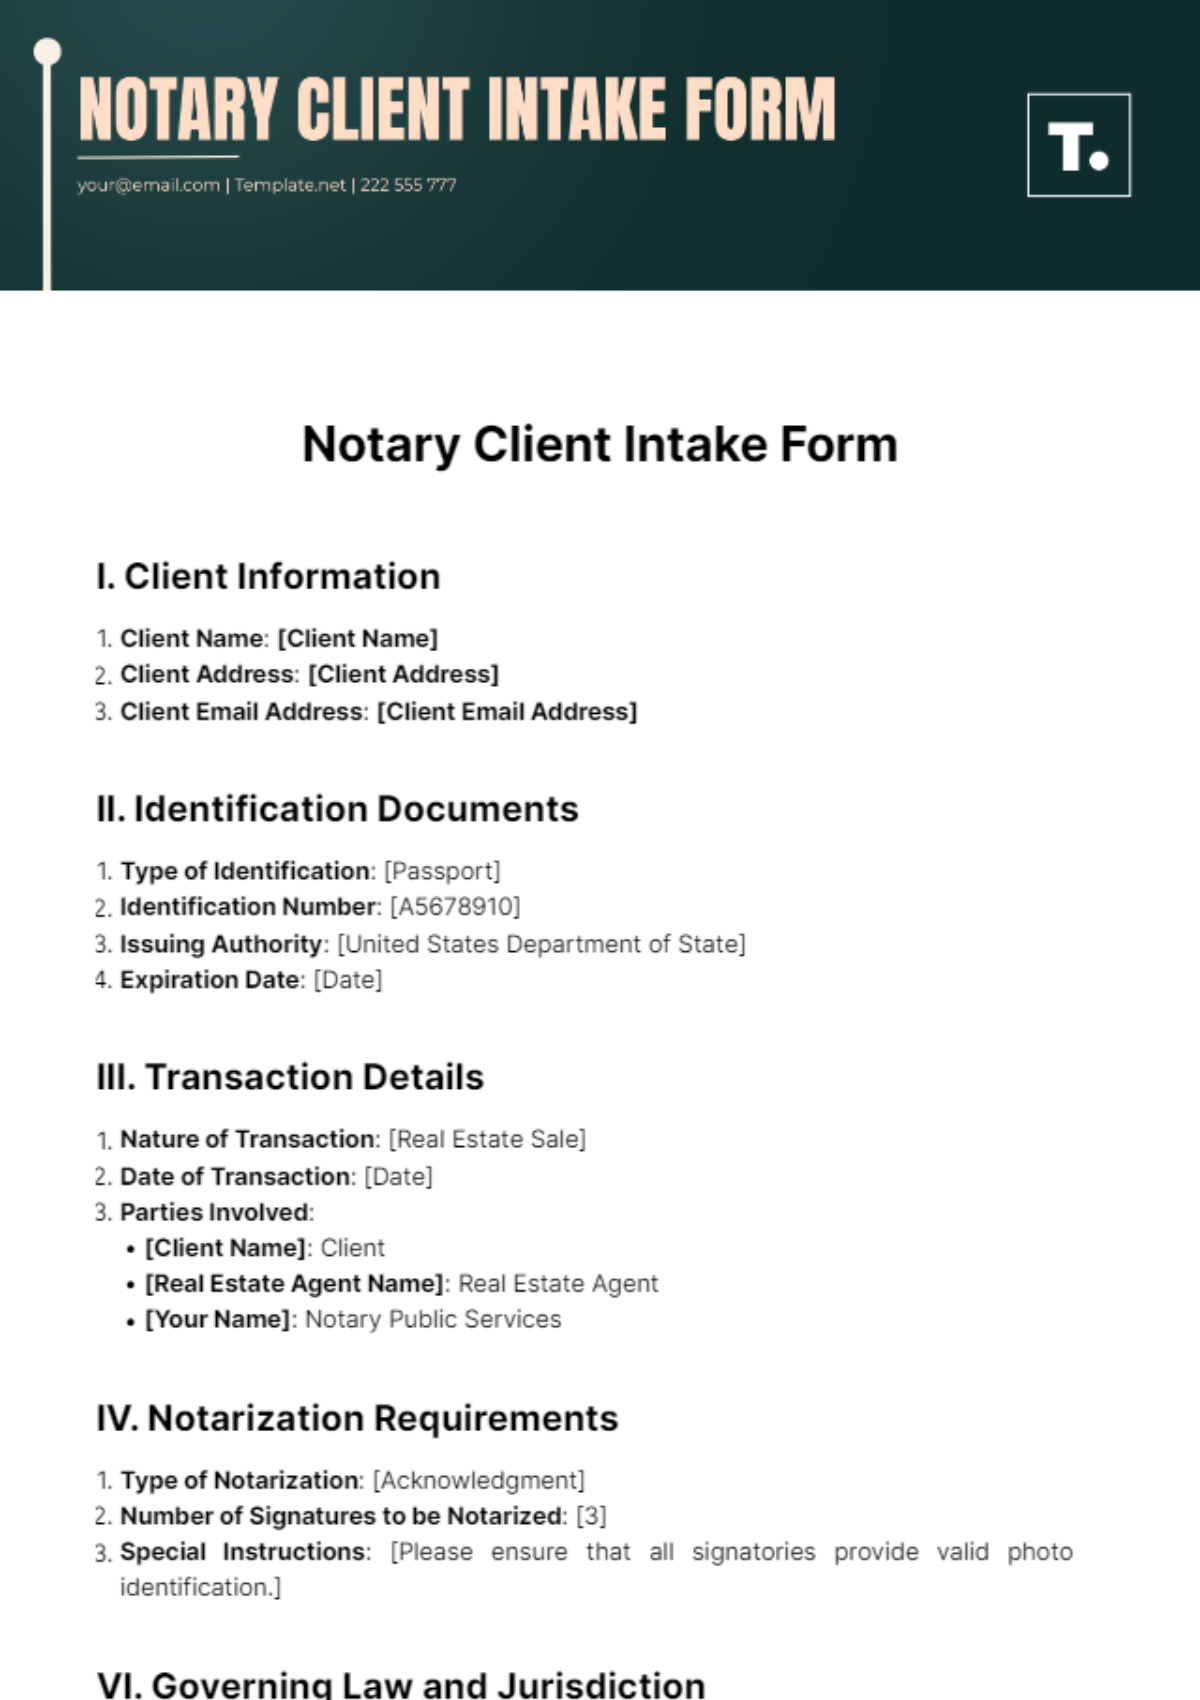 Notary Client Intake Form Template